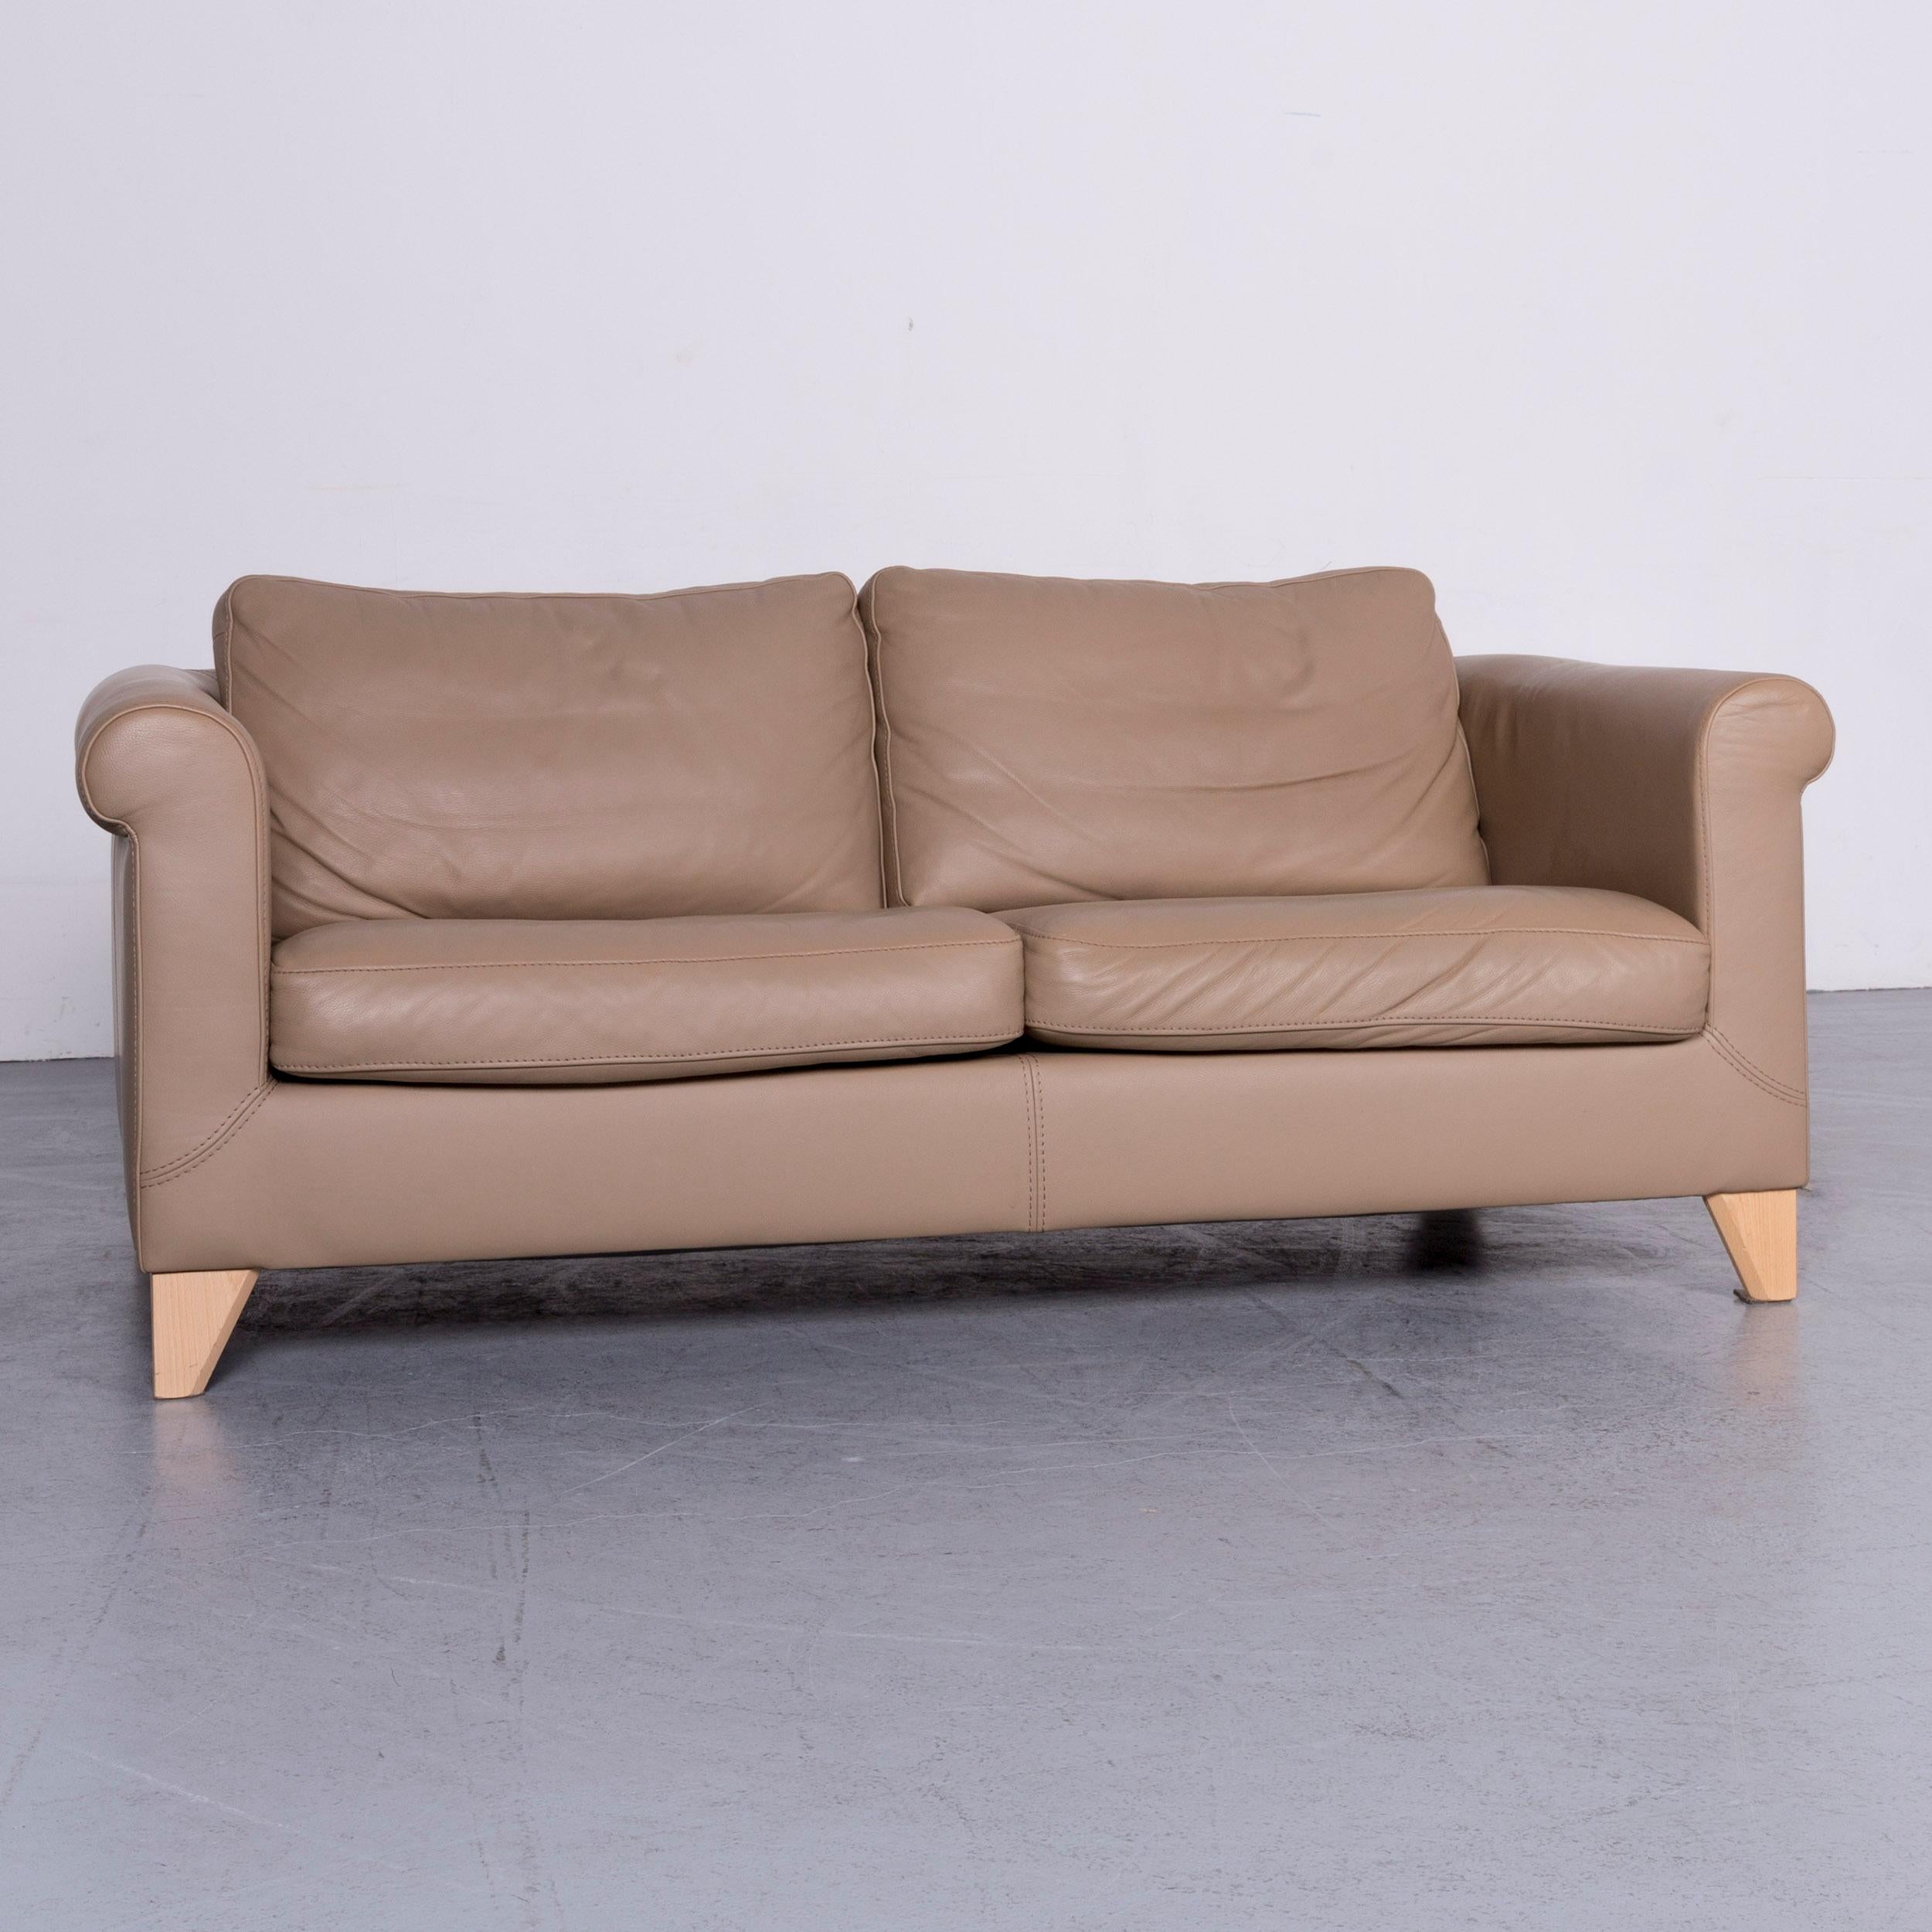 We bring to you a Machalke designer leather sofa beige two-seat couch.